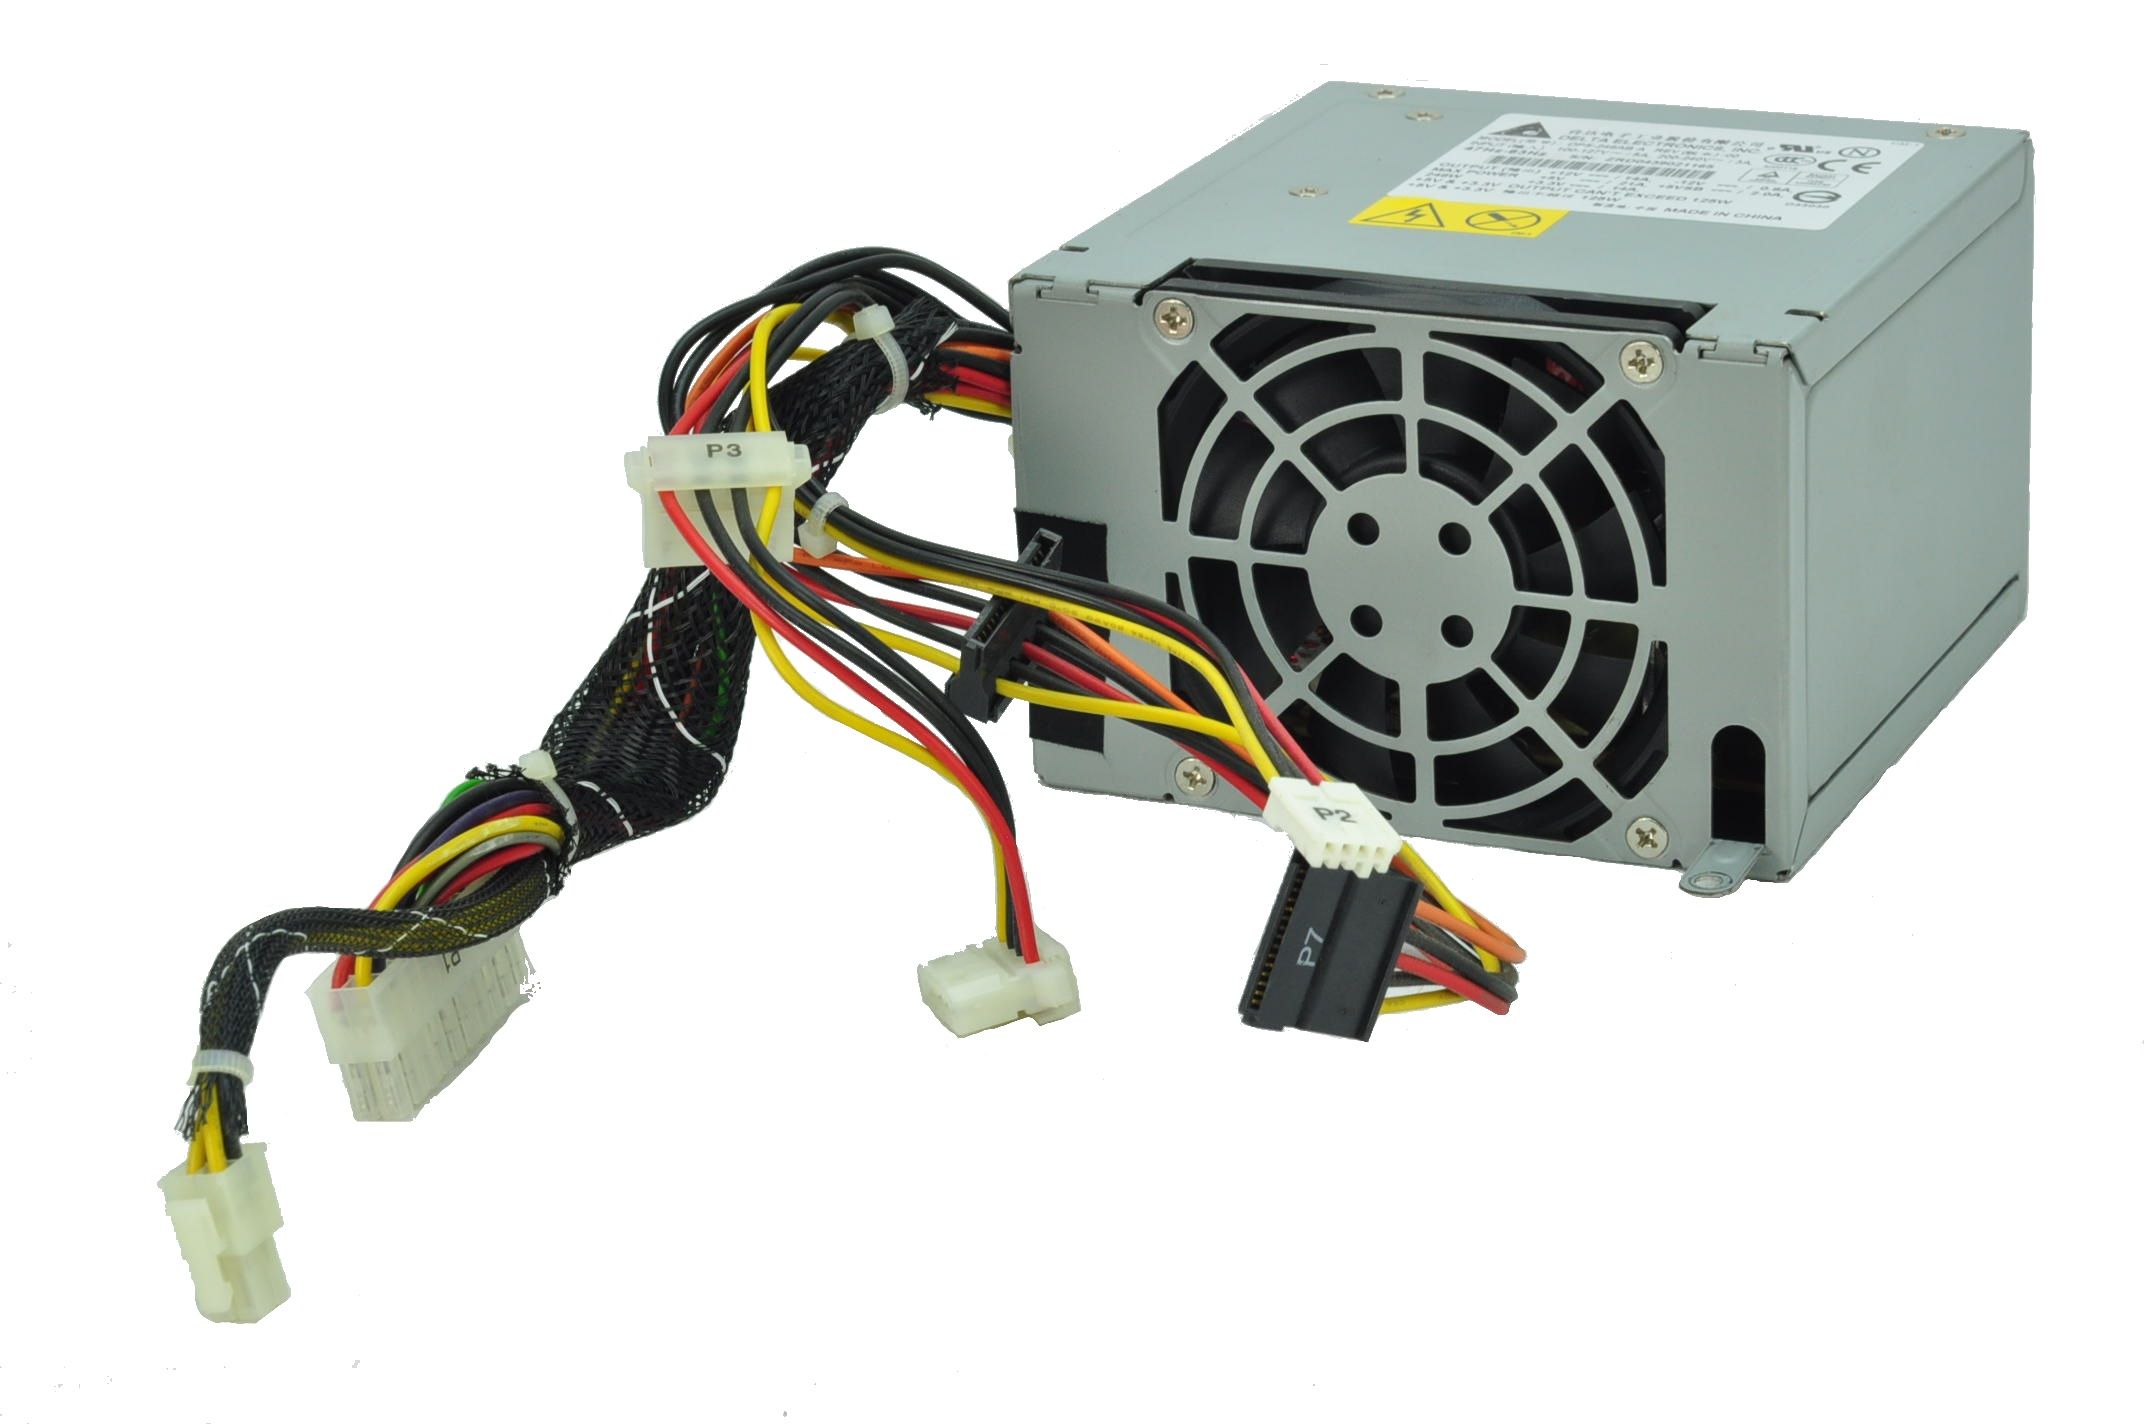 Delta Electronics 248W Power Supply DPS 248AB D